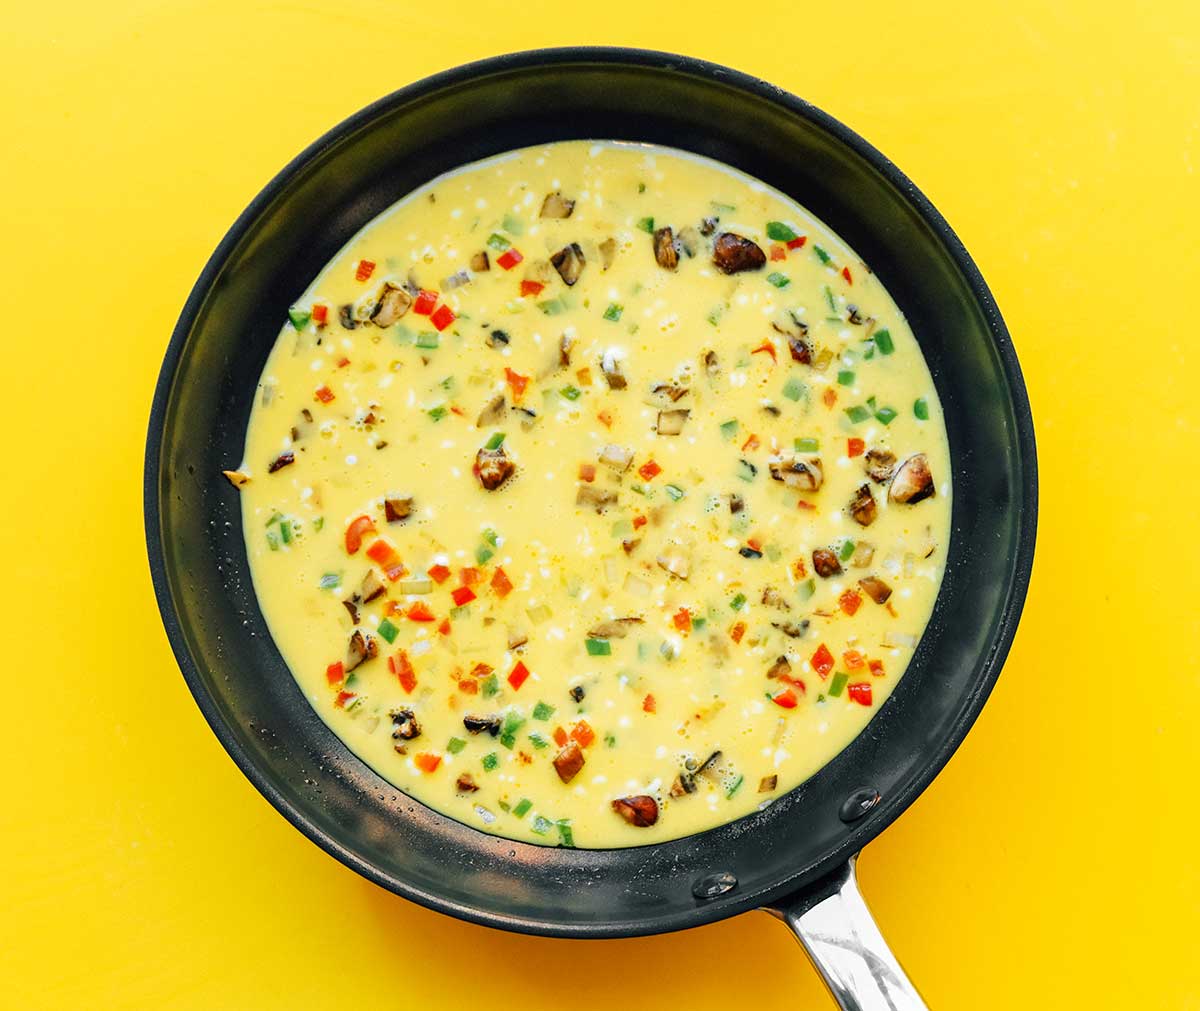 A skillet filled with uncooked omelette ingredients